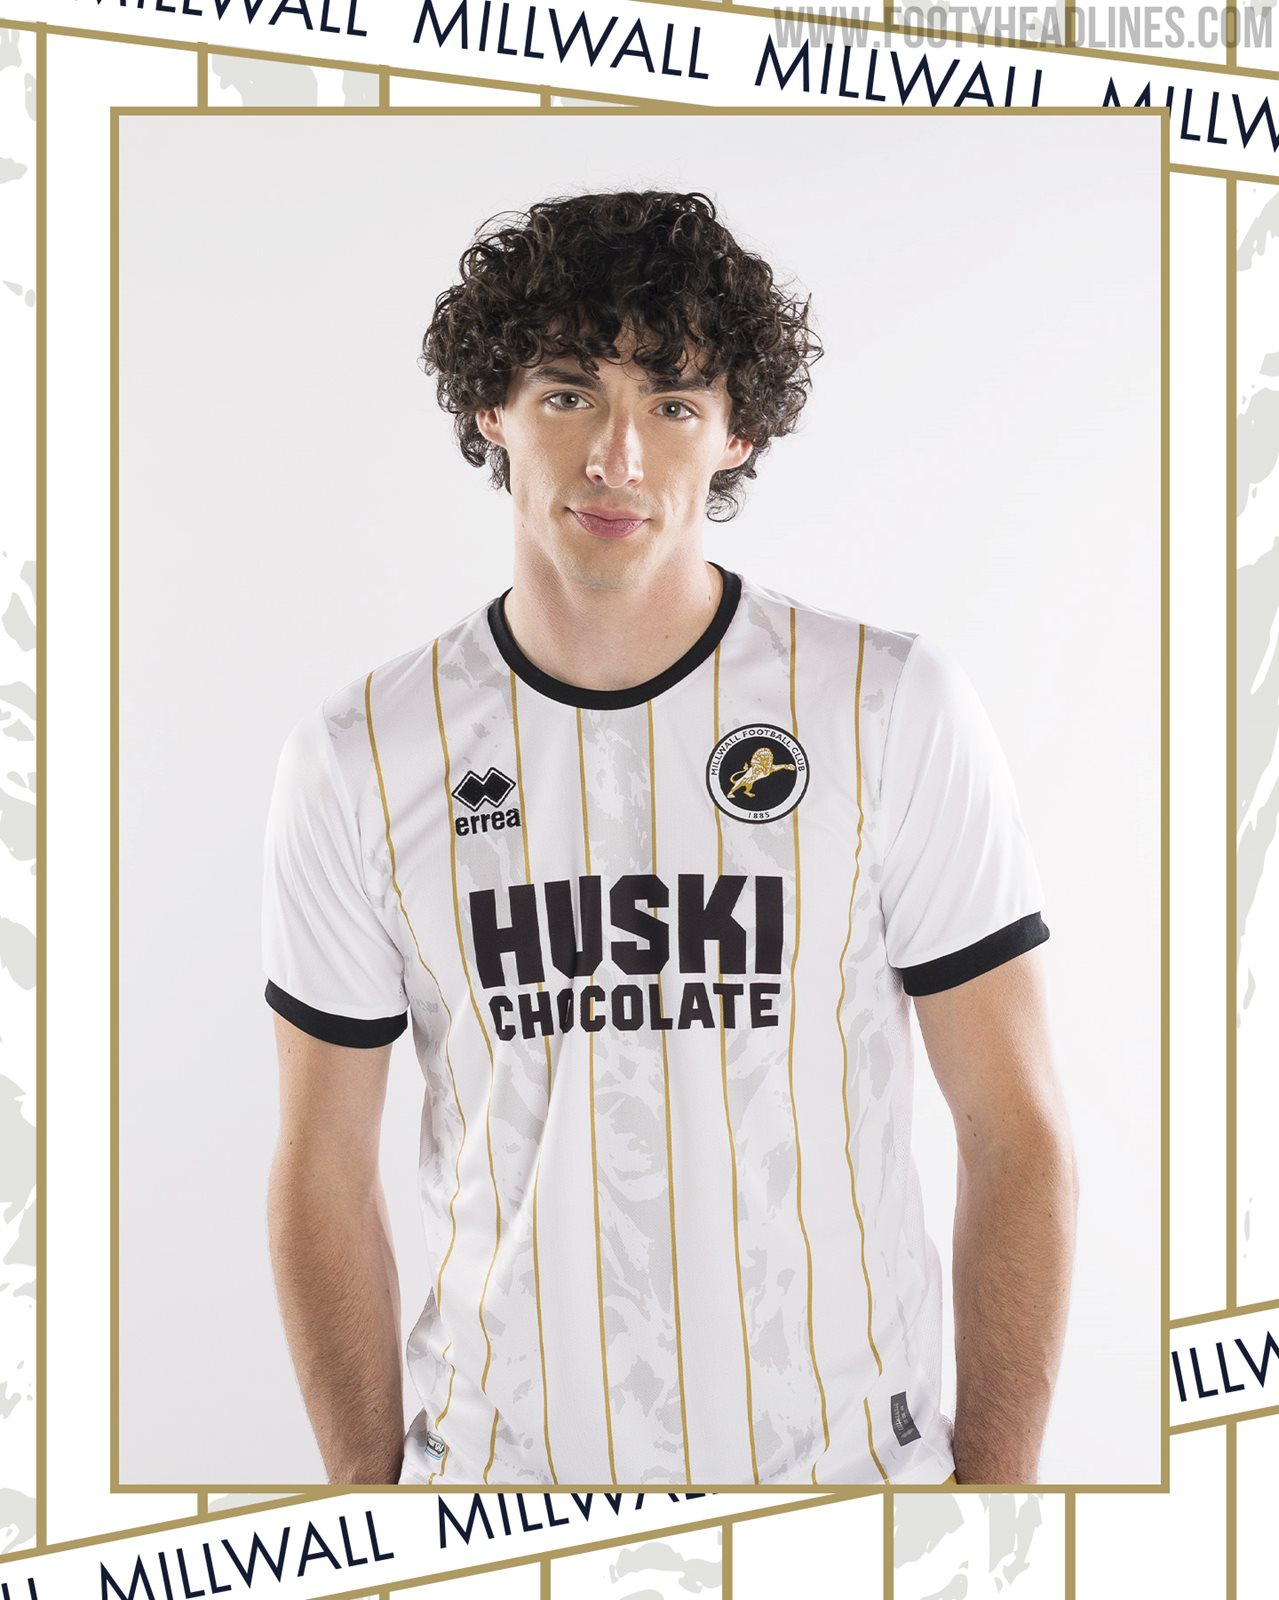 No More Hummel After One Year - Errea Millwall 23-24 Home Kit Released -  Footy Headlines